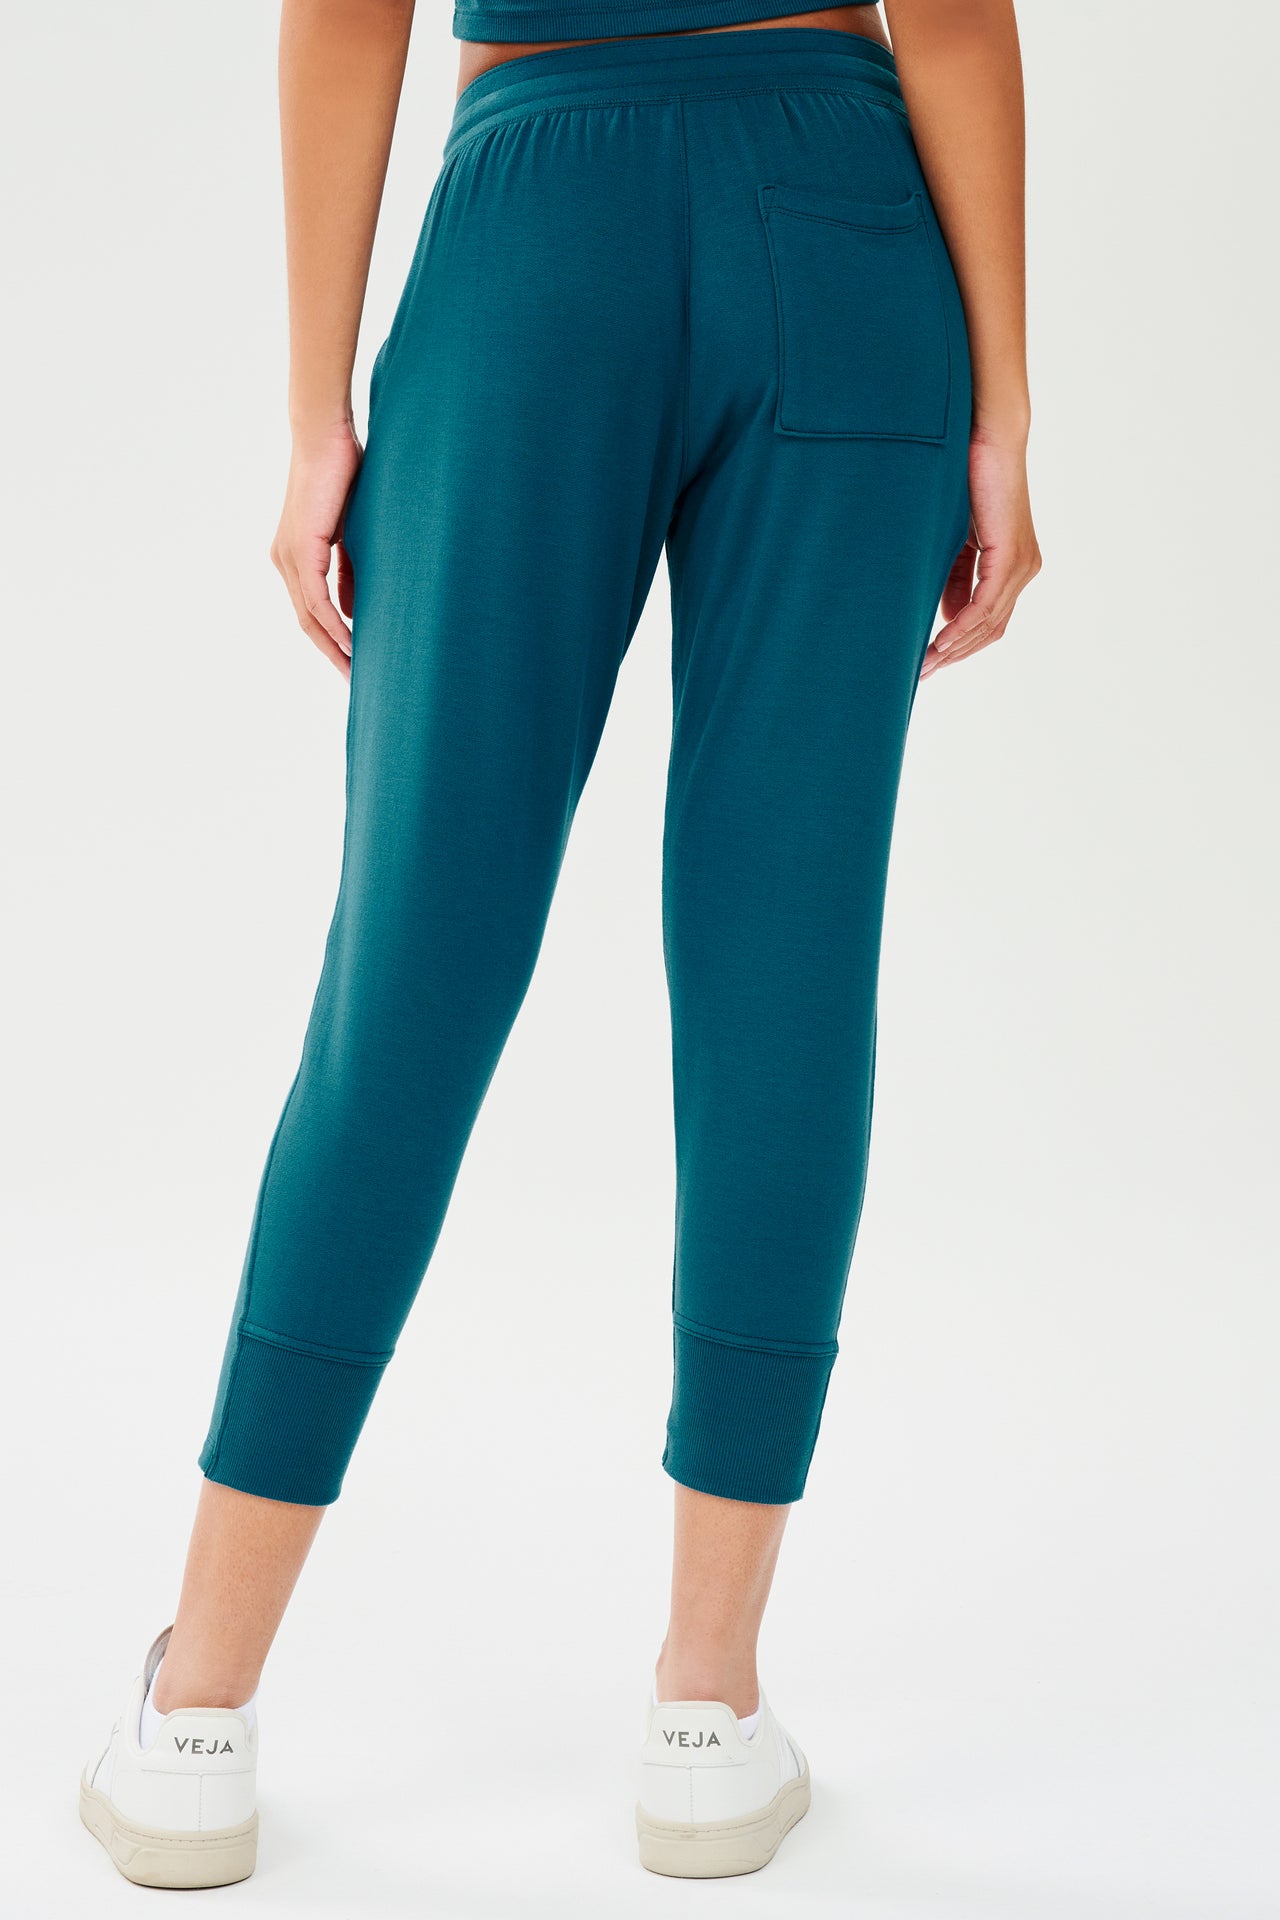 Back view of woman wearing a green and blue tone sweatpant with tapered leg and above ankle length with back pocket. Paired with white shoes.